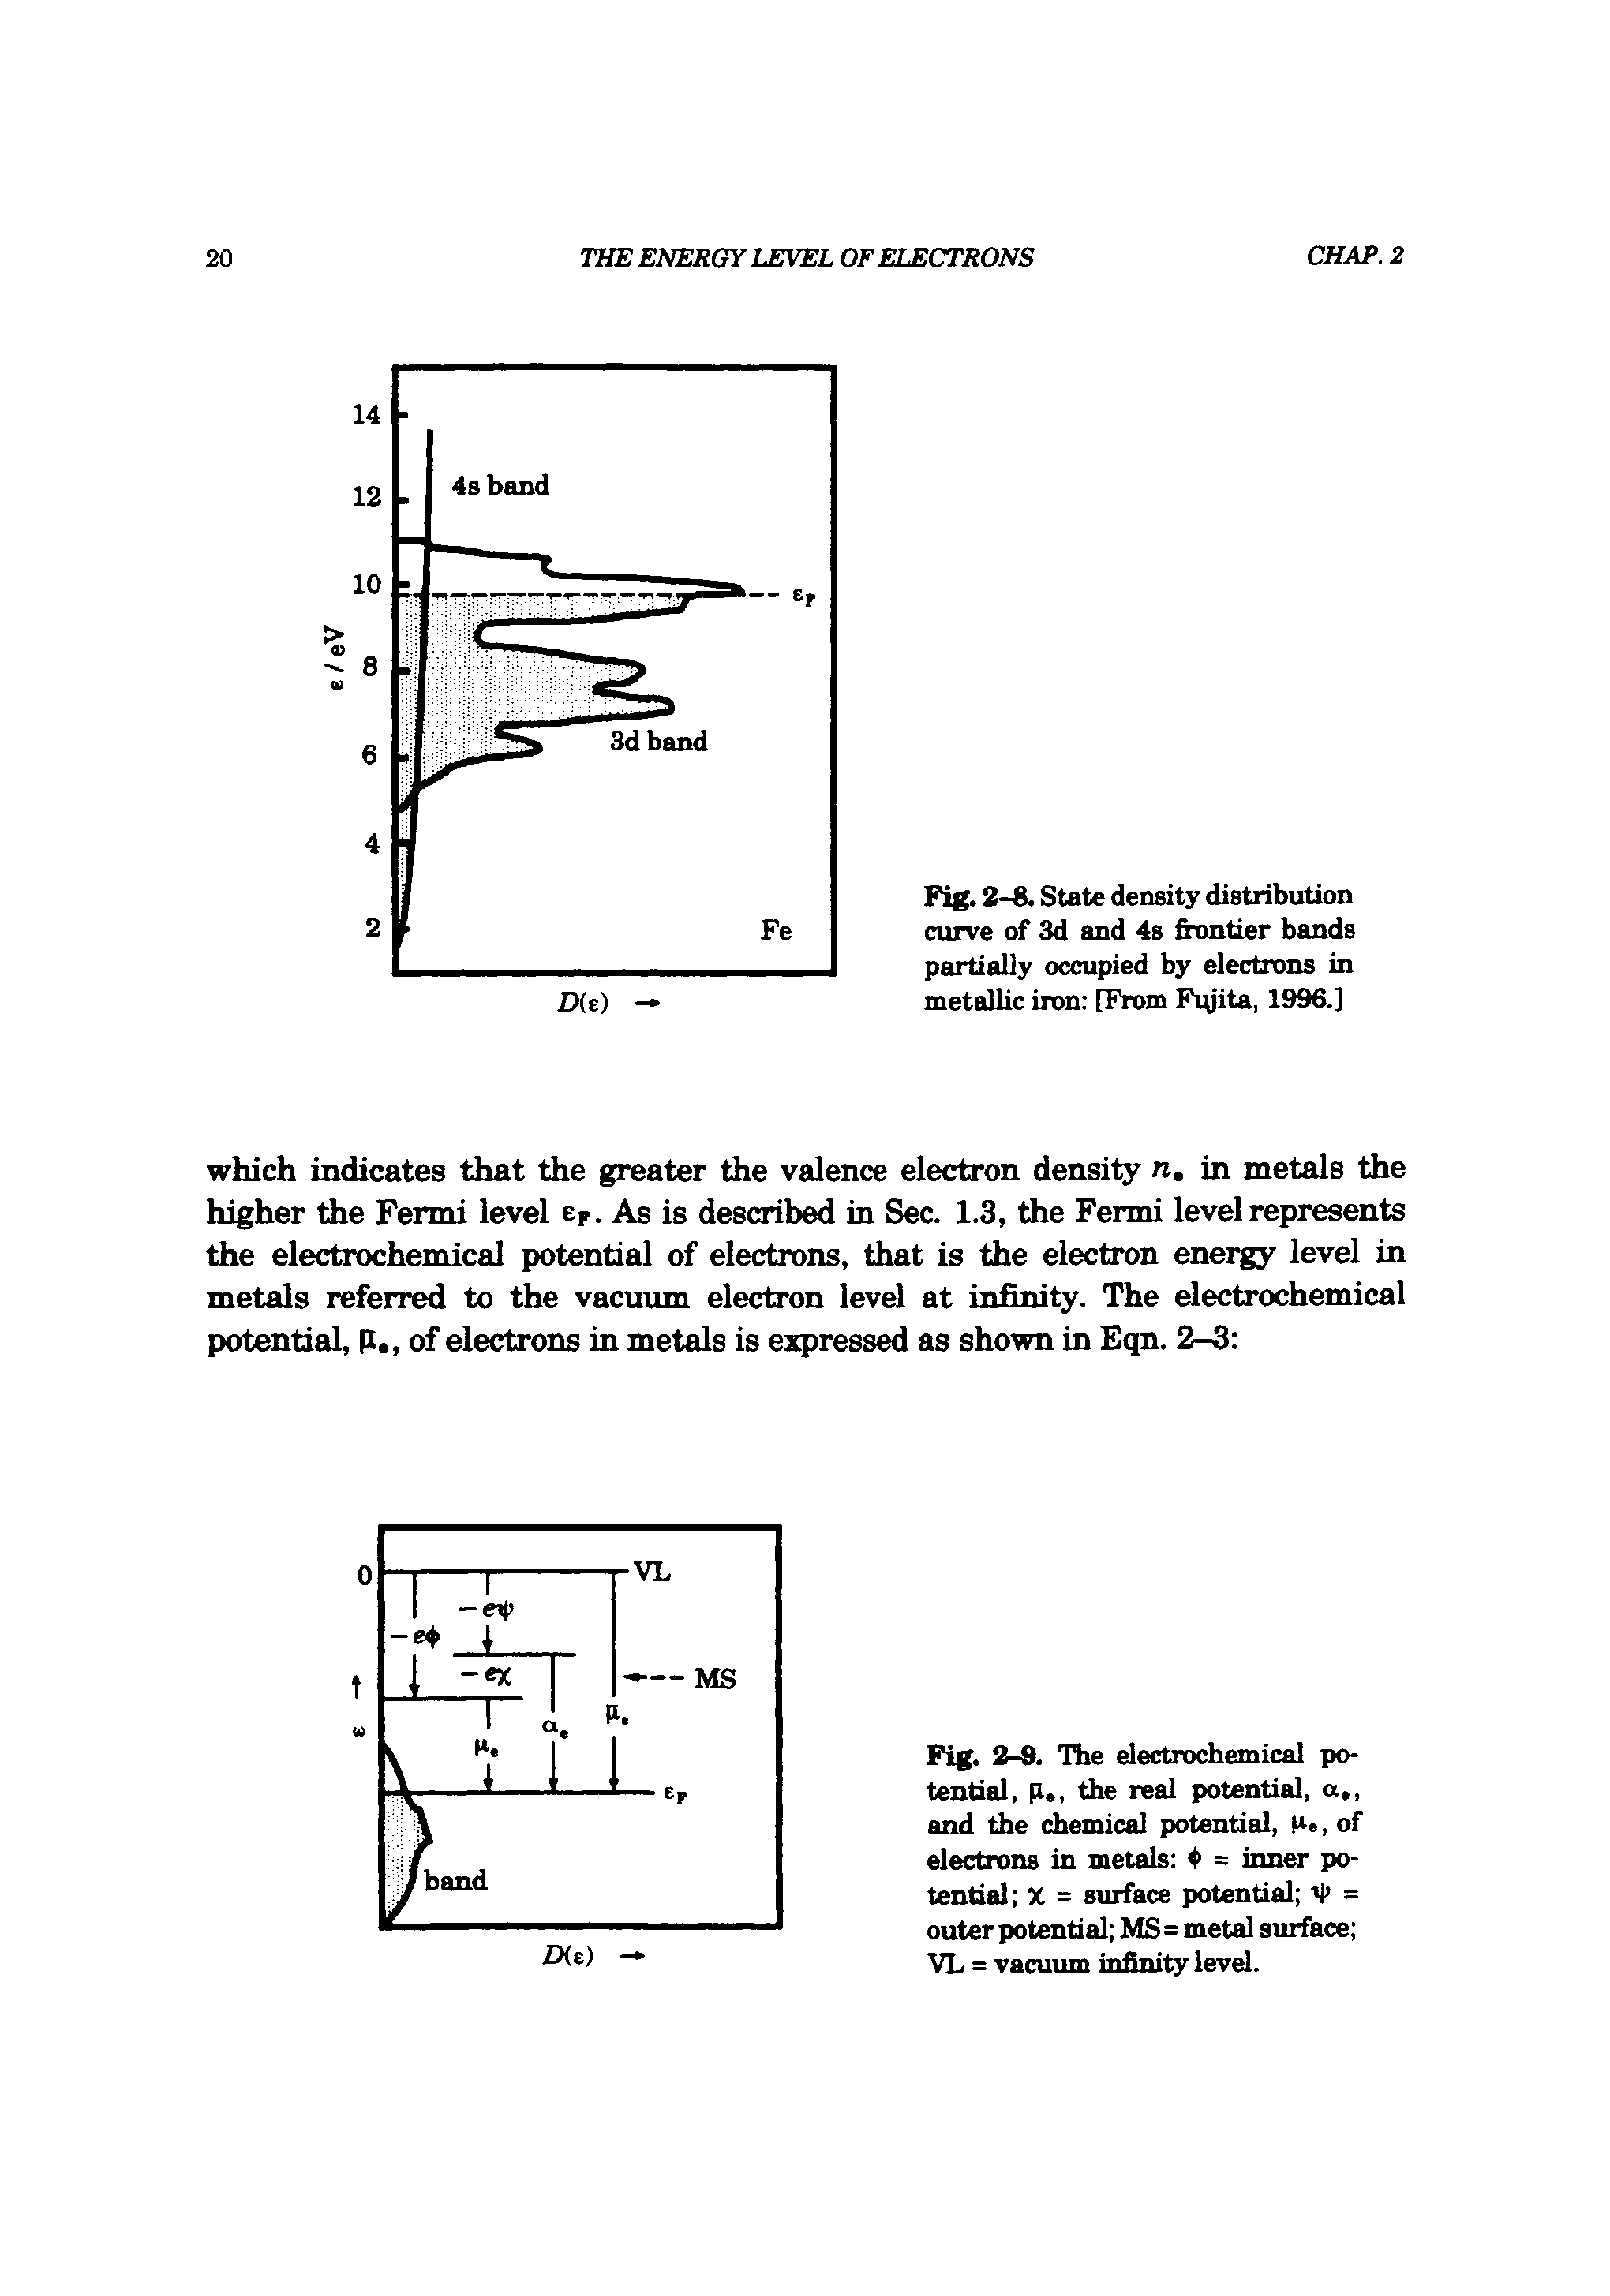 Fig. 2-8. State density distribution curve of 3d and 4s frontier bands partially occupied by electrons in metallic iron [From Fiyita, 1996.]...